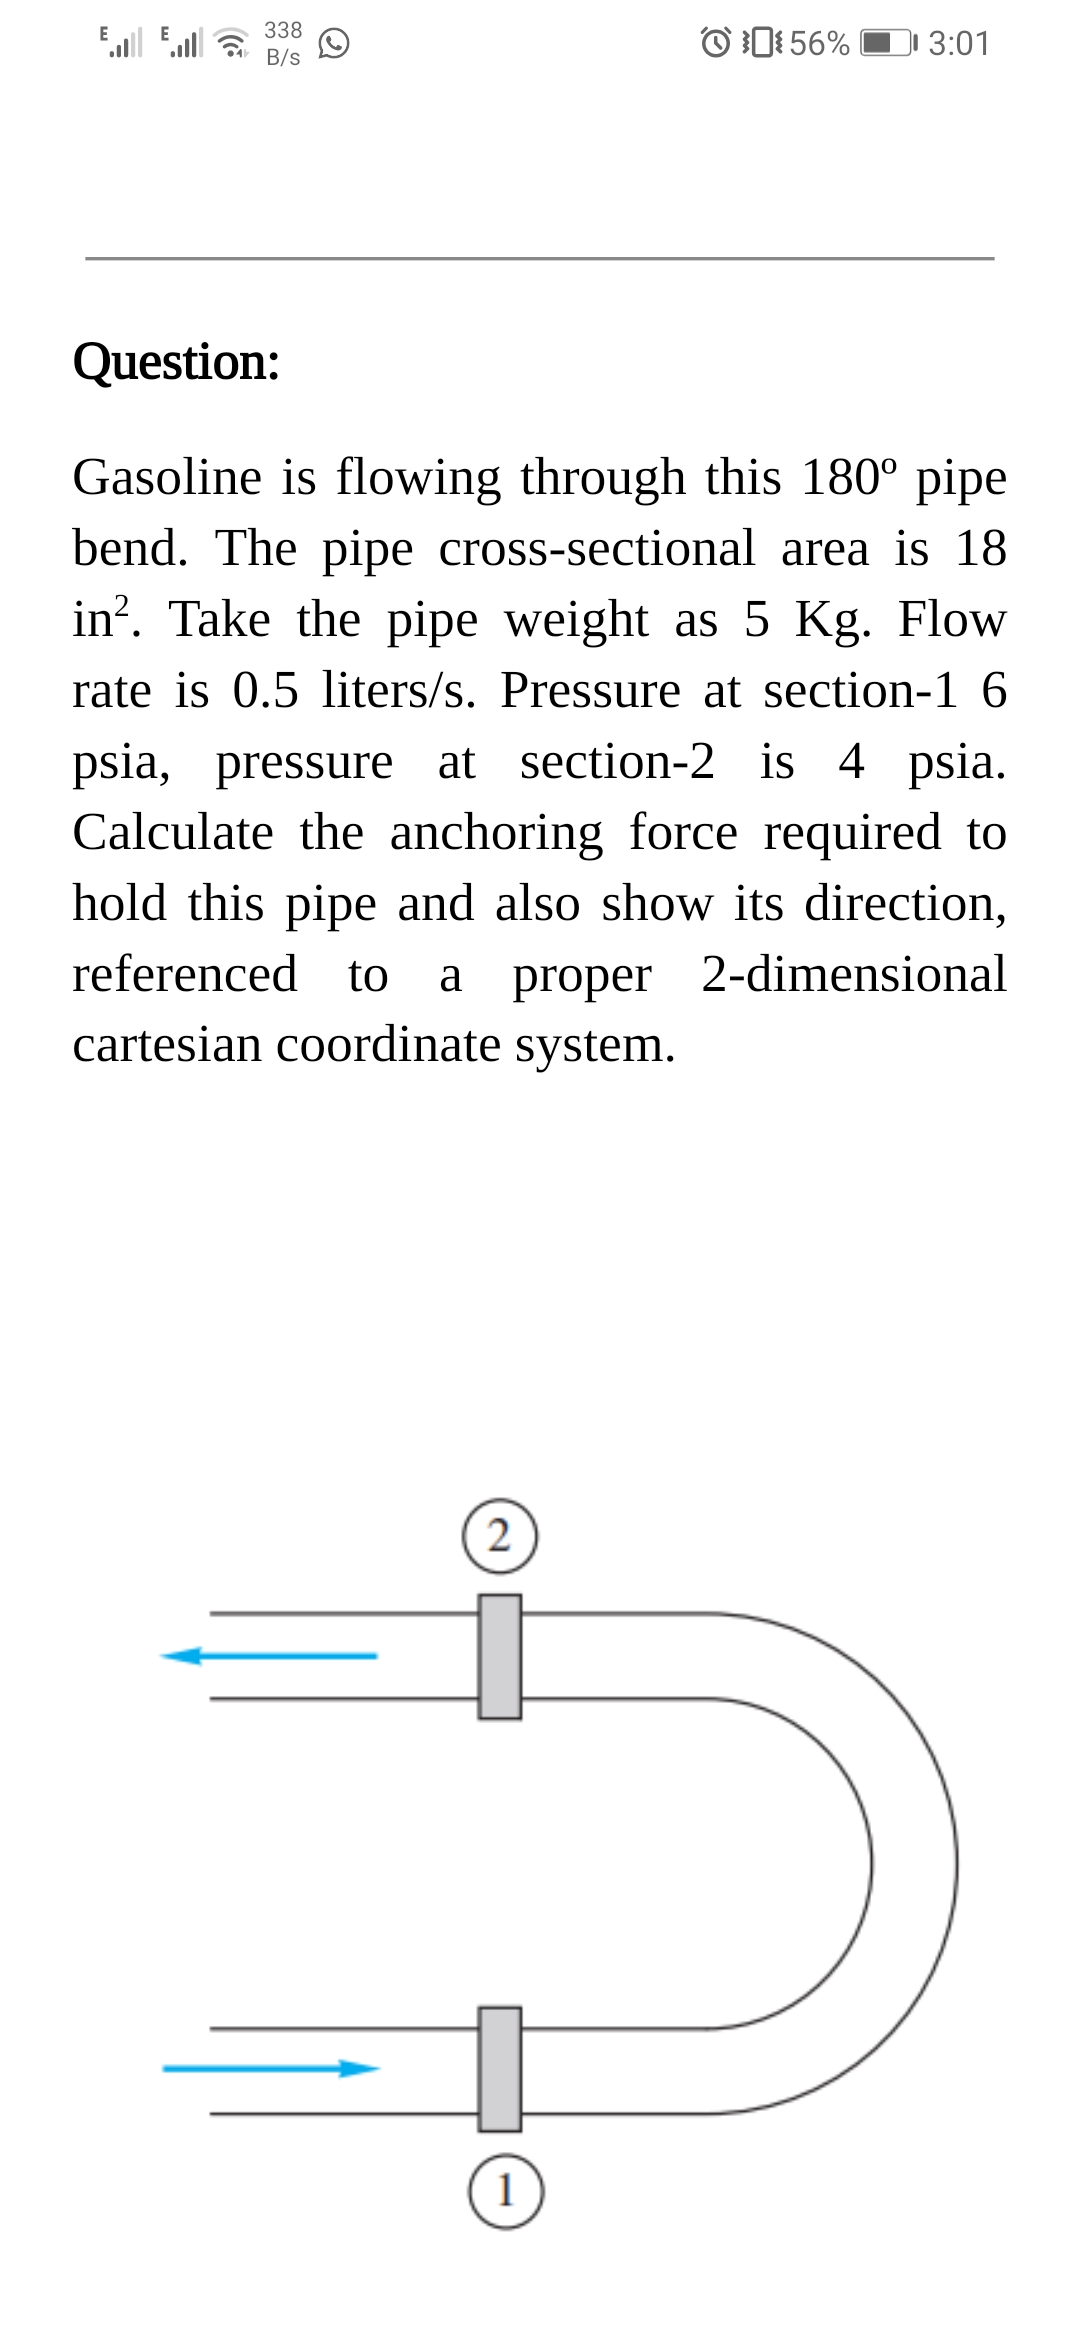 338
B/s
O 1: 56%
E
3:01
Question:
Gasoline is flowing through this 180° pipe
bend. The pipe cross-sectional area is 18
in?. Take the pipe weight as 5 Kg. Flow
rate is 0.5 liters/s. Pressure at section-1 6
psia, pressure at section-2 is 4 psia.
Calculate the anchoring force required to
hold this pipe and also show its direction,
referenced to
proper 2-dimensional
a
cartesian coordinate system.
(2
1
